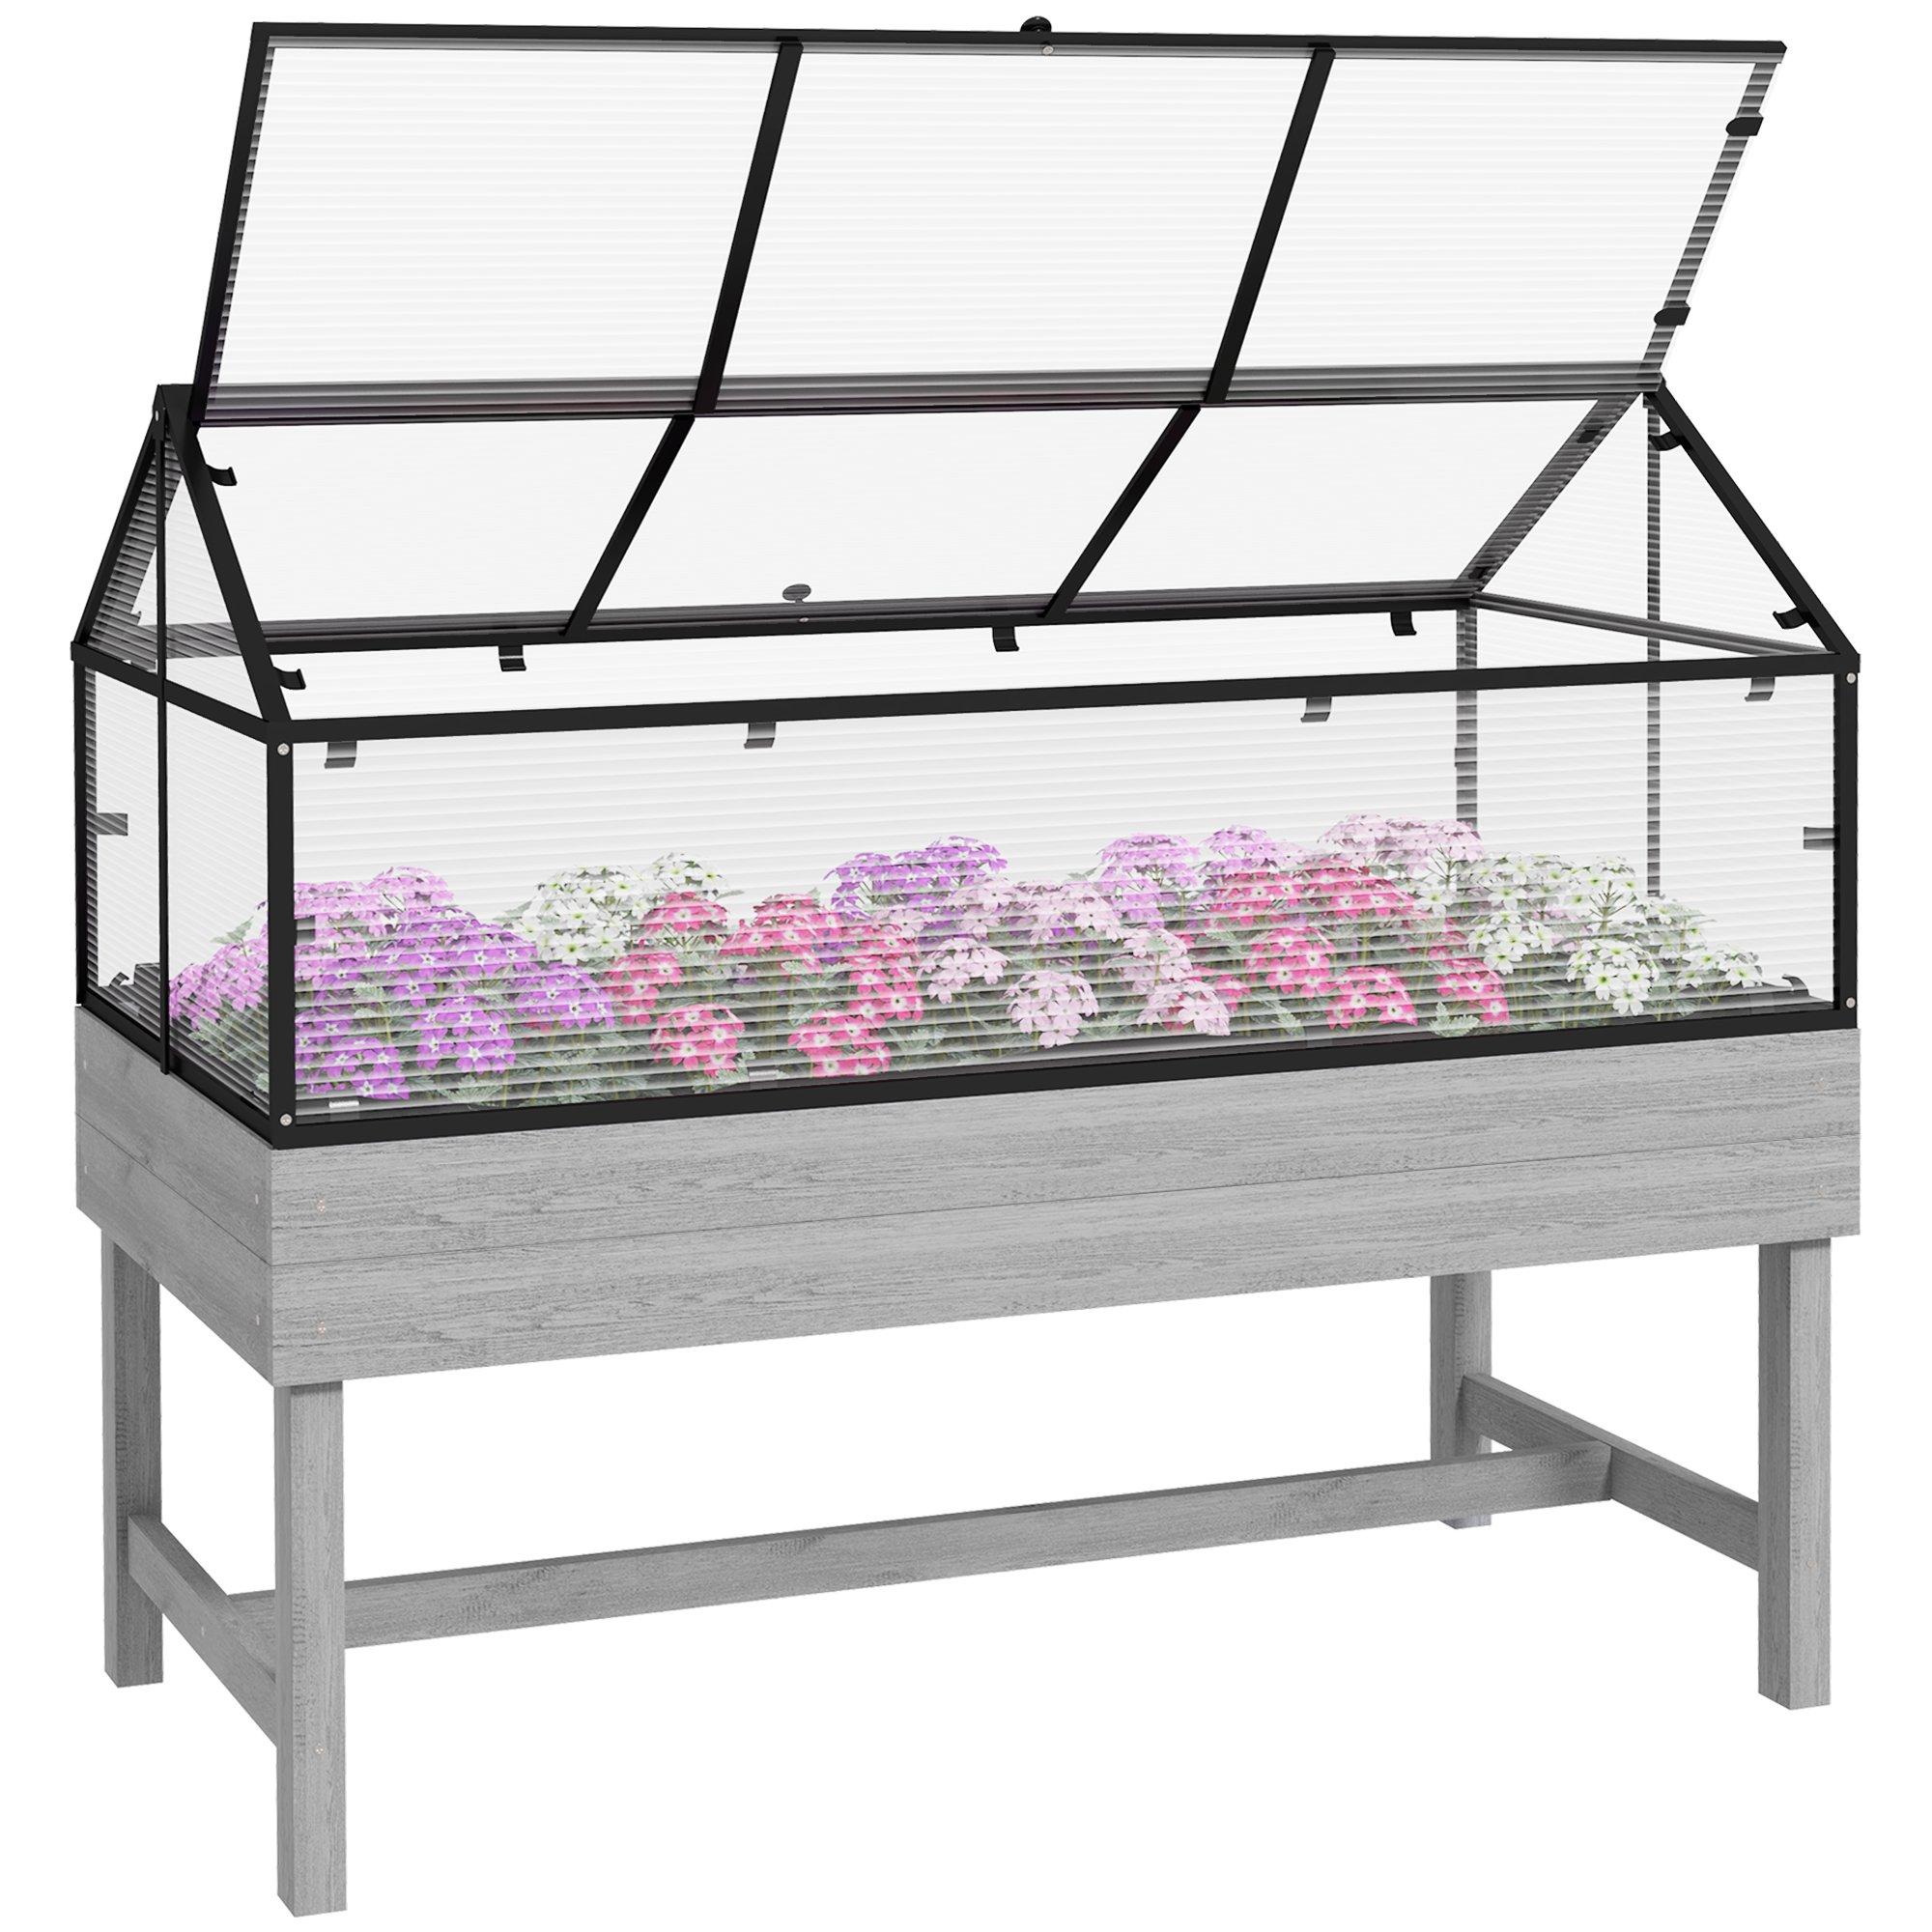 Raised Garden Bed with Cold Frame Greenhouse with Polycarbonate Panel Top Vent